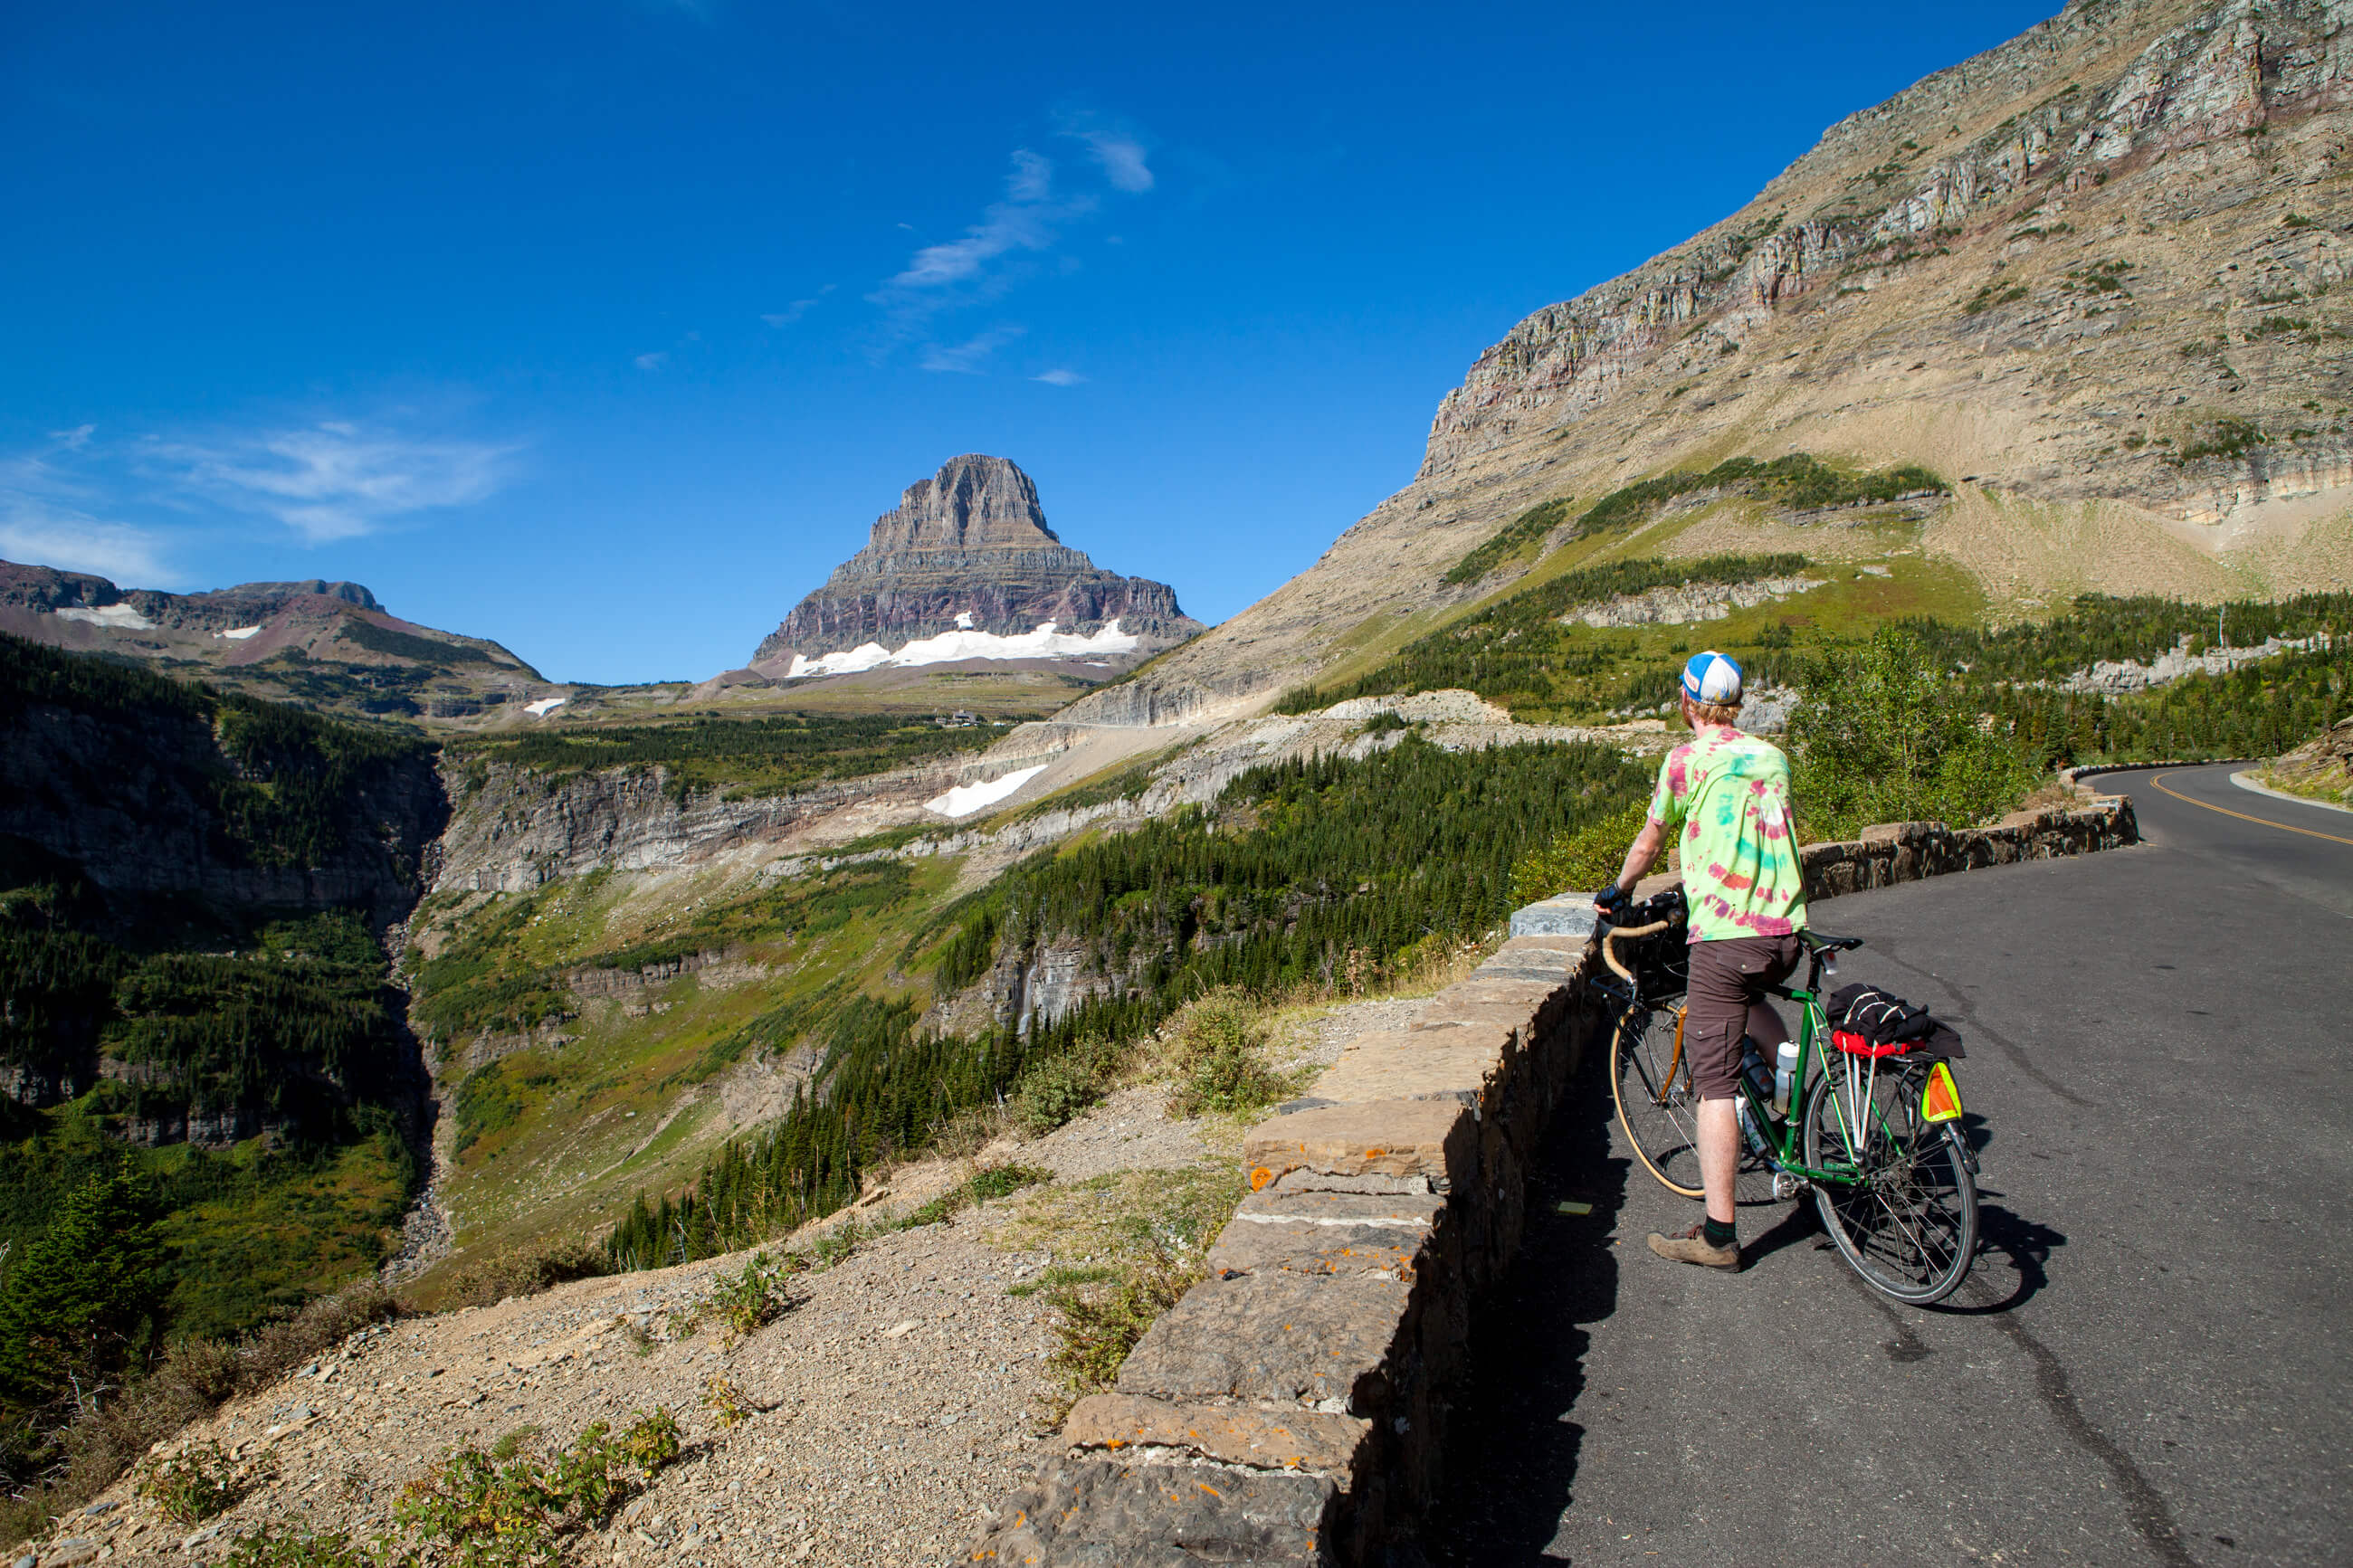 A bicyclist stops to take in the view on the Going to the Sun Road in Glacier National Park in Montana